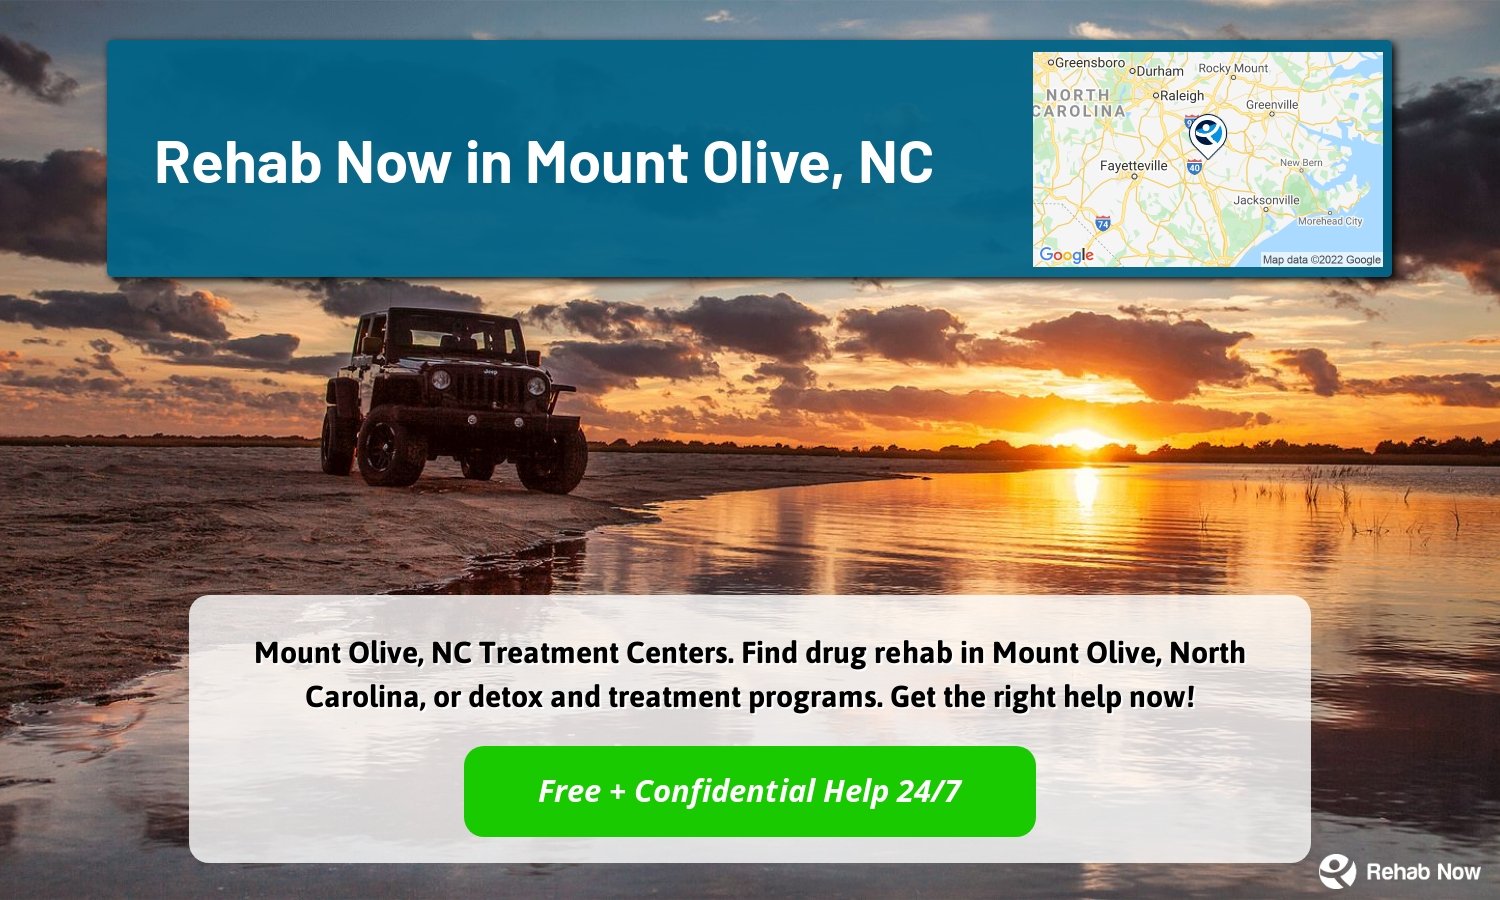 Mount Olive, NC Treatment Centers. Find drug rehab in Mount Olive, North Carolina, or detox and treatment programs. Get the right help now!